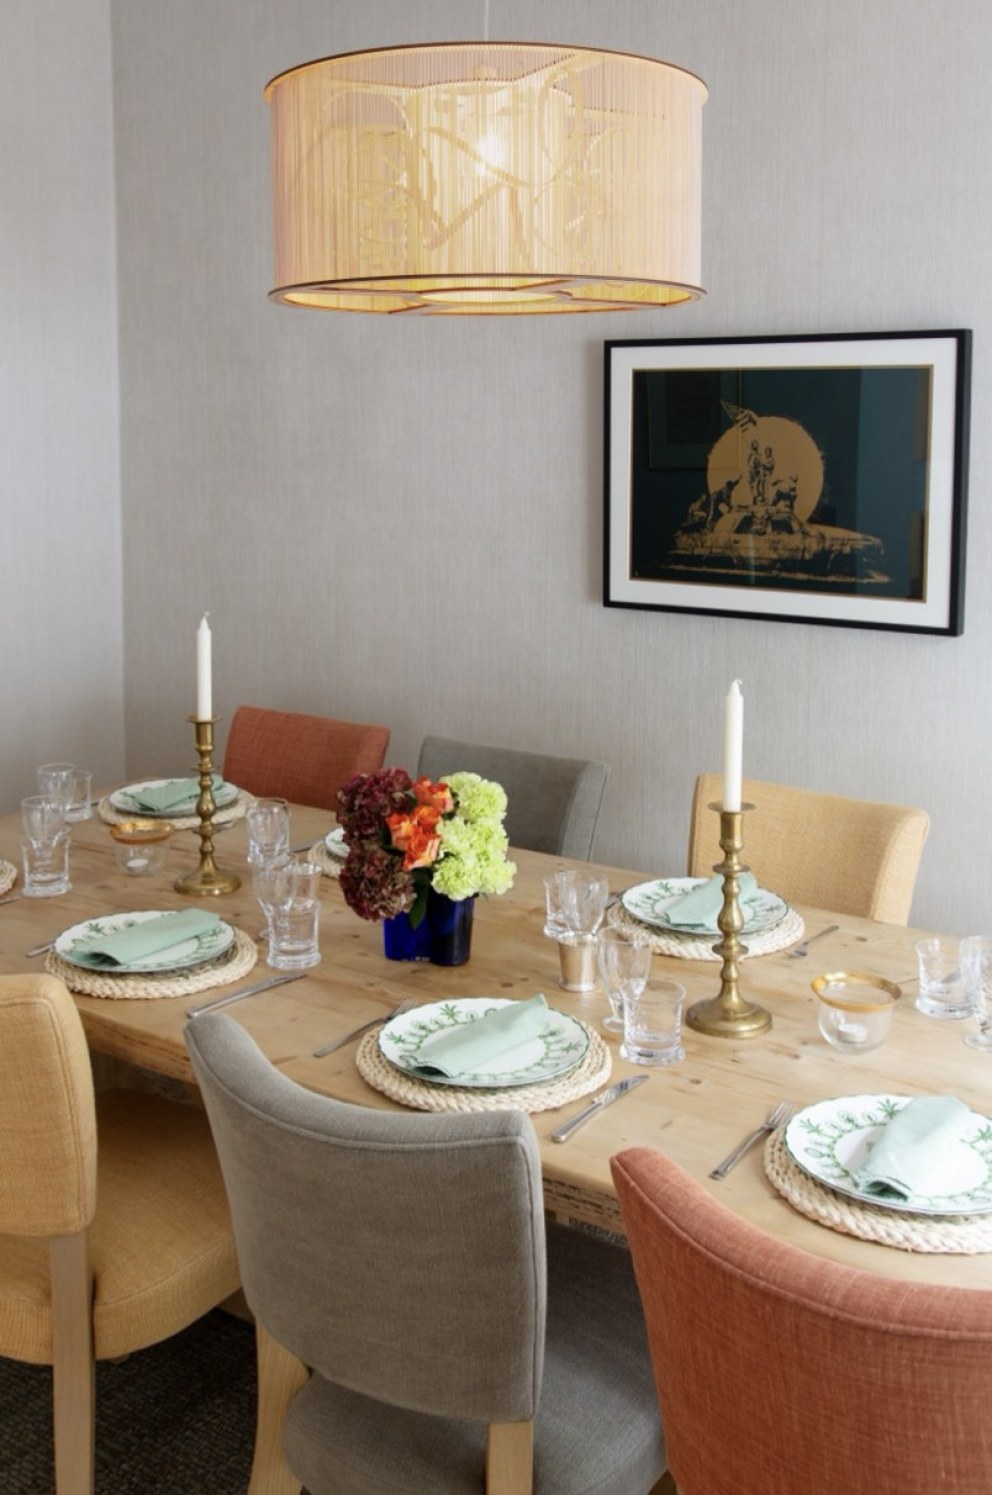 Wetherby Gardens | Wetherby gardens, dining area | Interior Designers